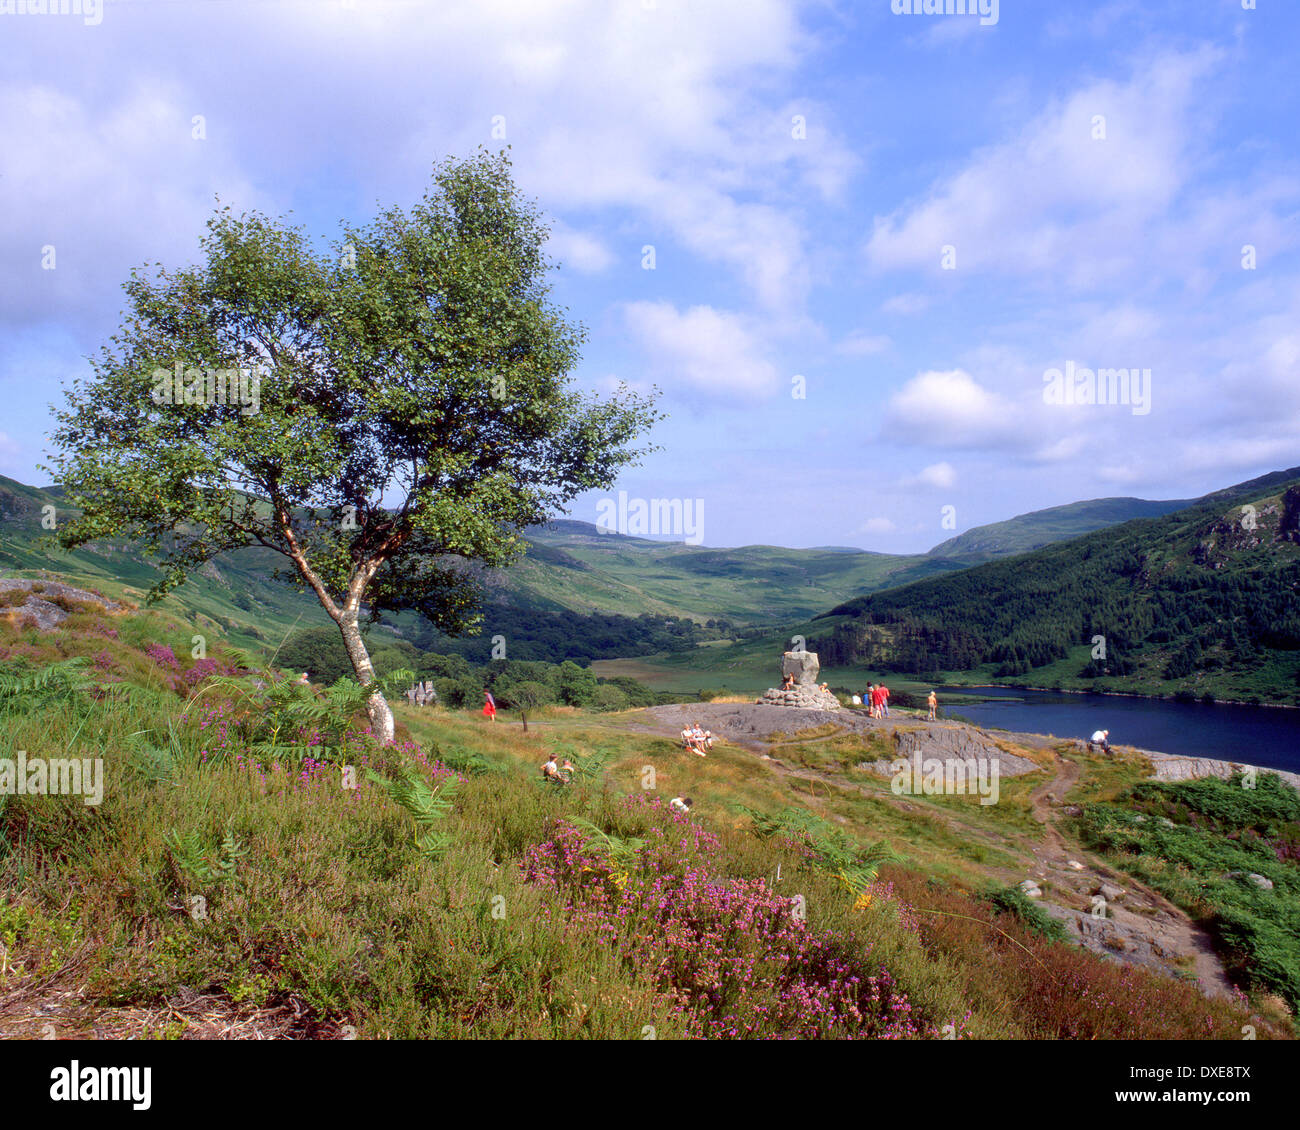 King Robert the bruces stone overlooking lochTrool,glentrool forest park,New galloway, Stock Photo